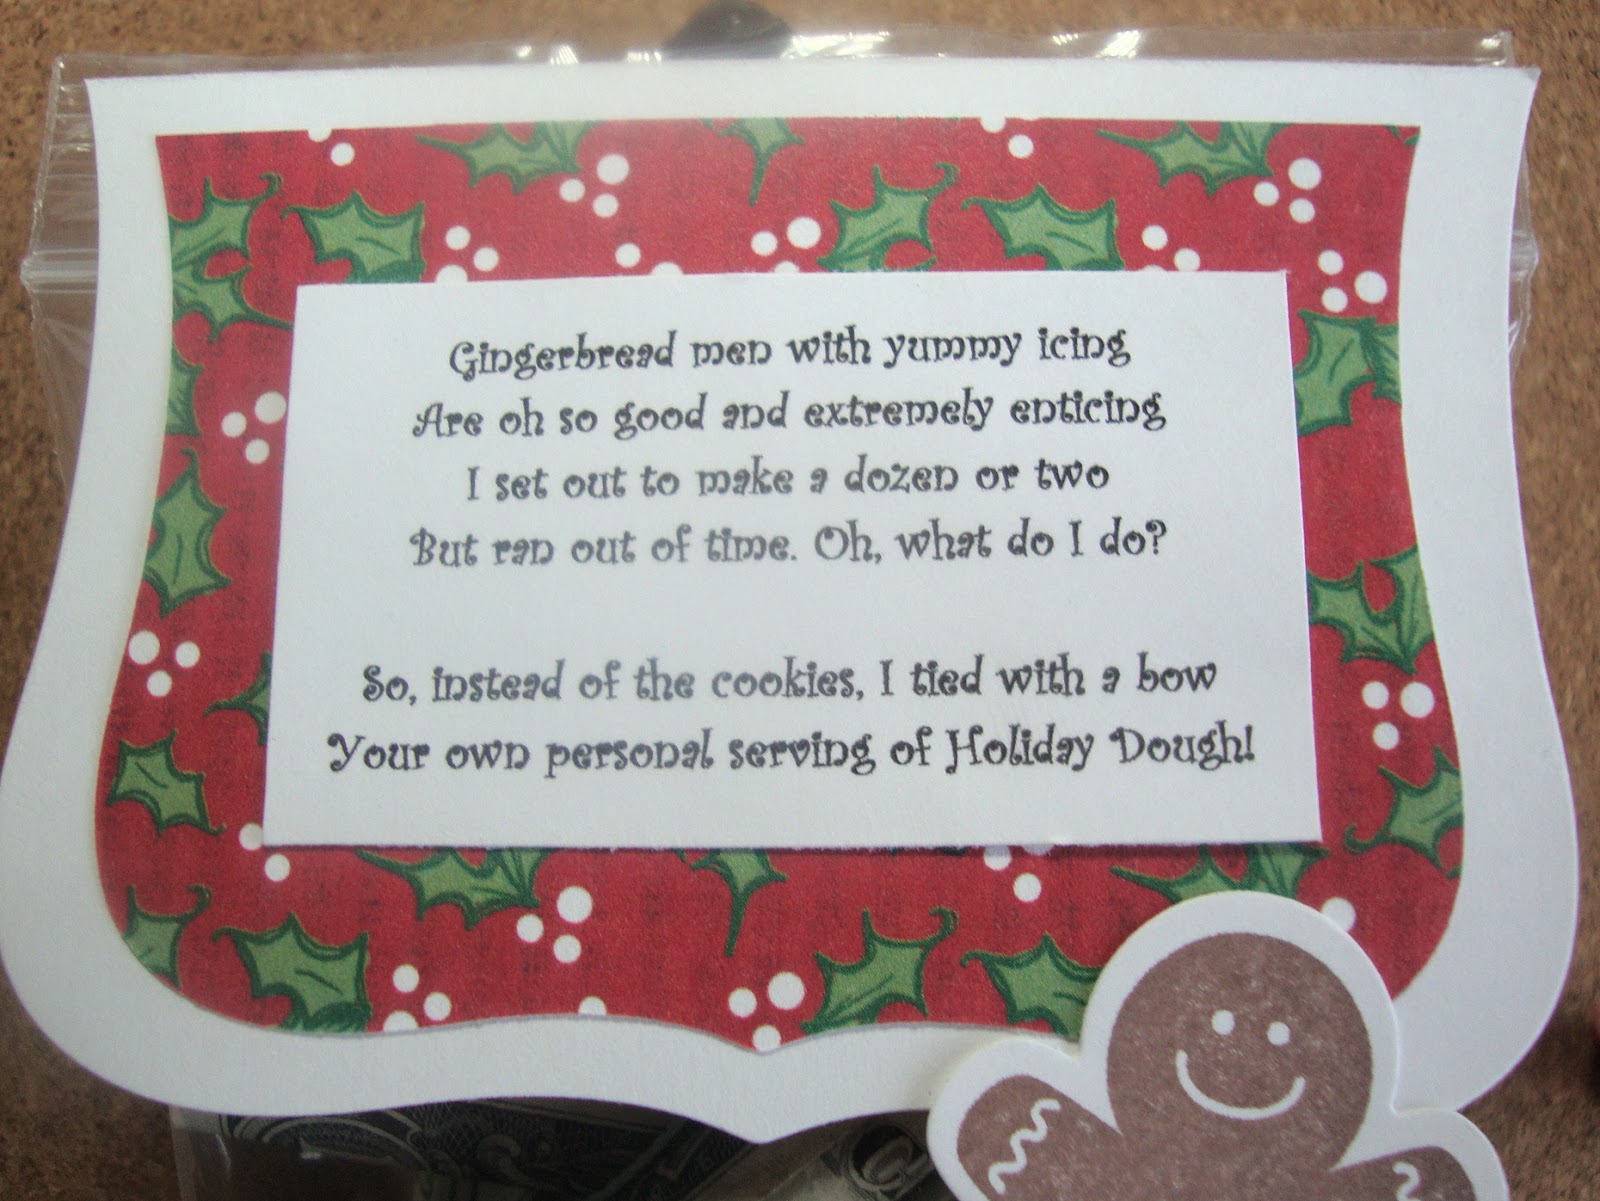 kathie-s-cards-personal-serving-of-holiday-dough